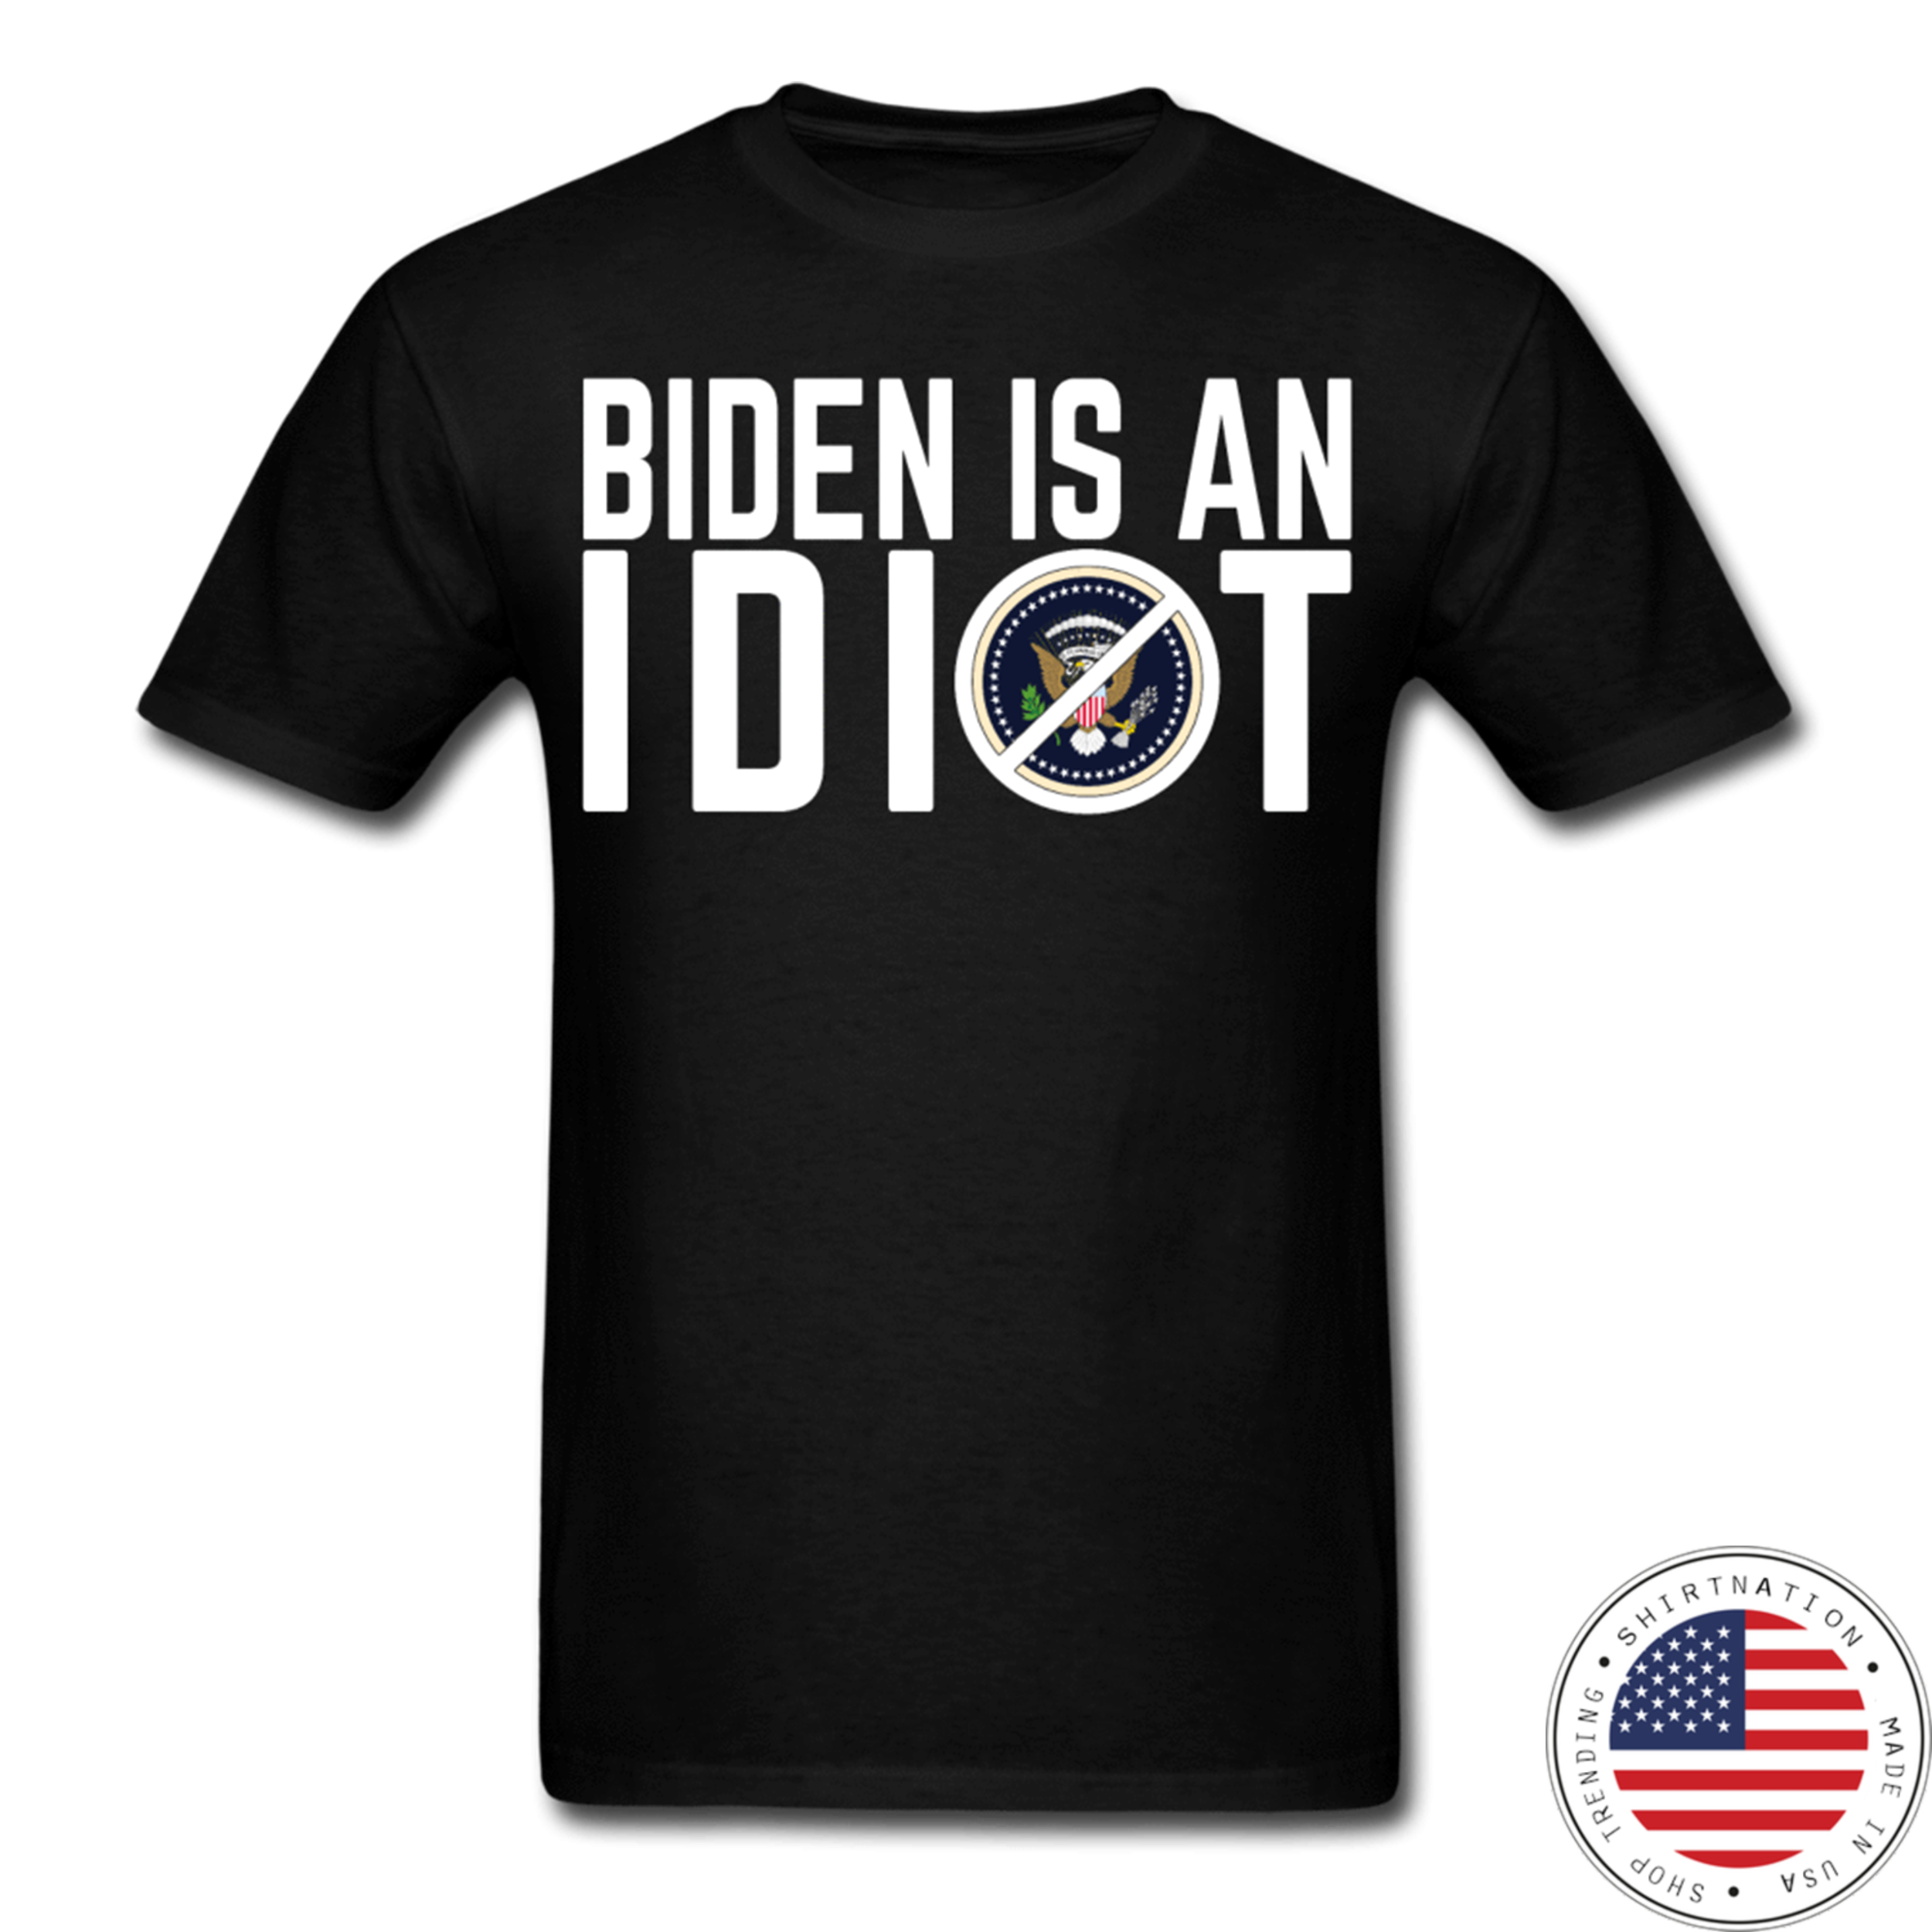 httpswww.screamingfreedom.comcollectionsmens t shirtsproductsbiden is an idiot t shirt